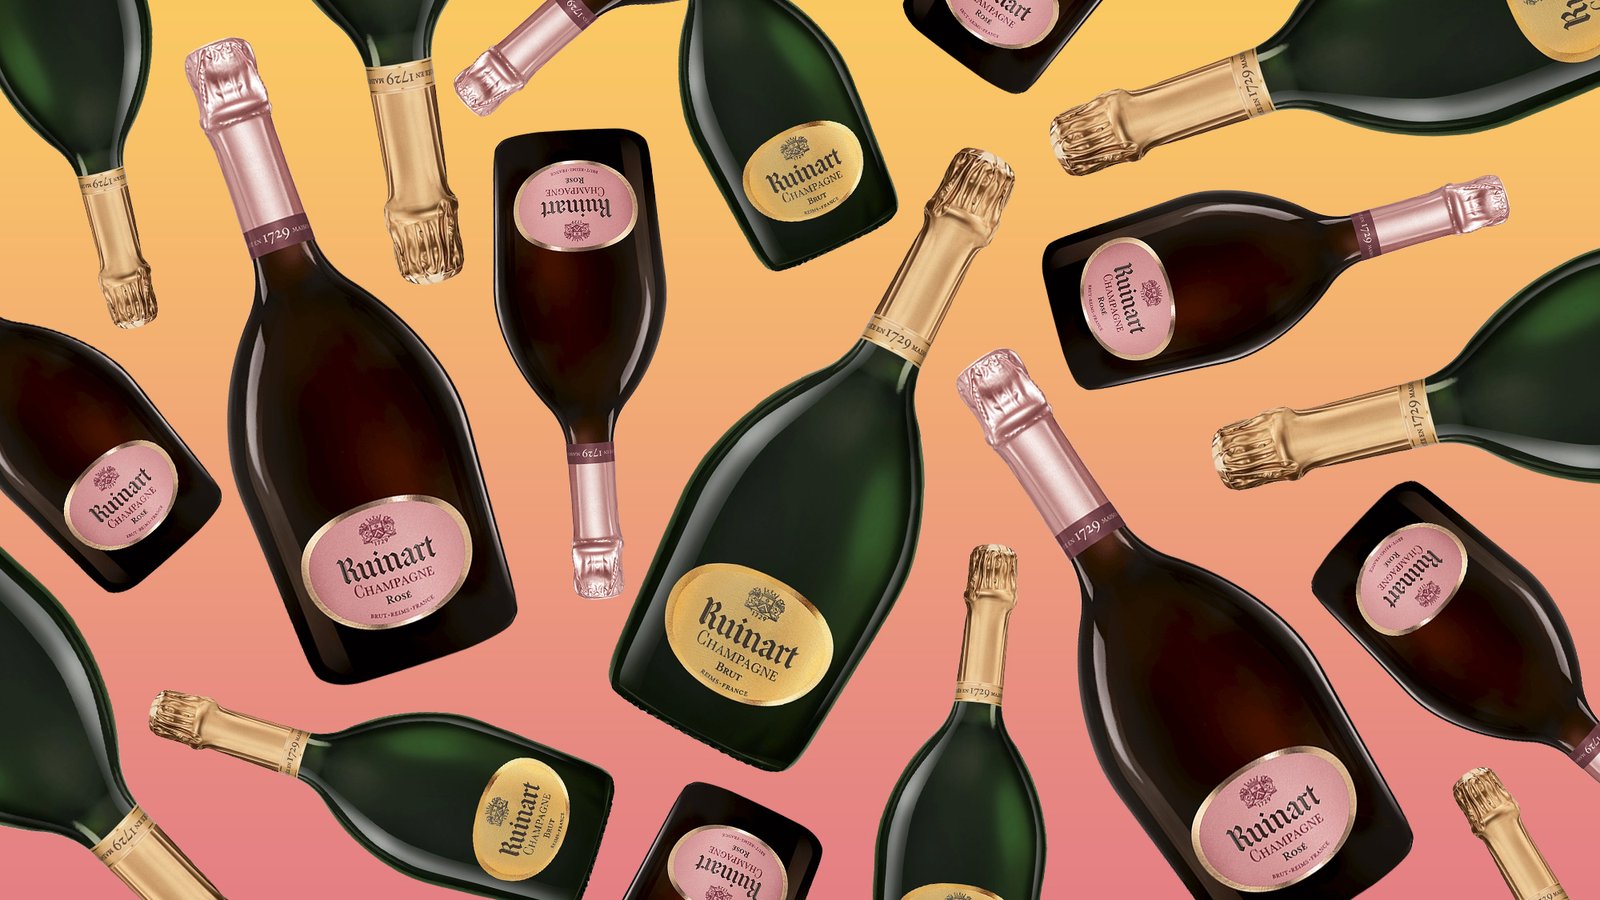 11 Things You Should Know About Ruinart Champagne